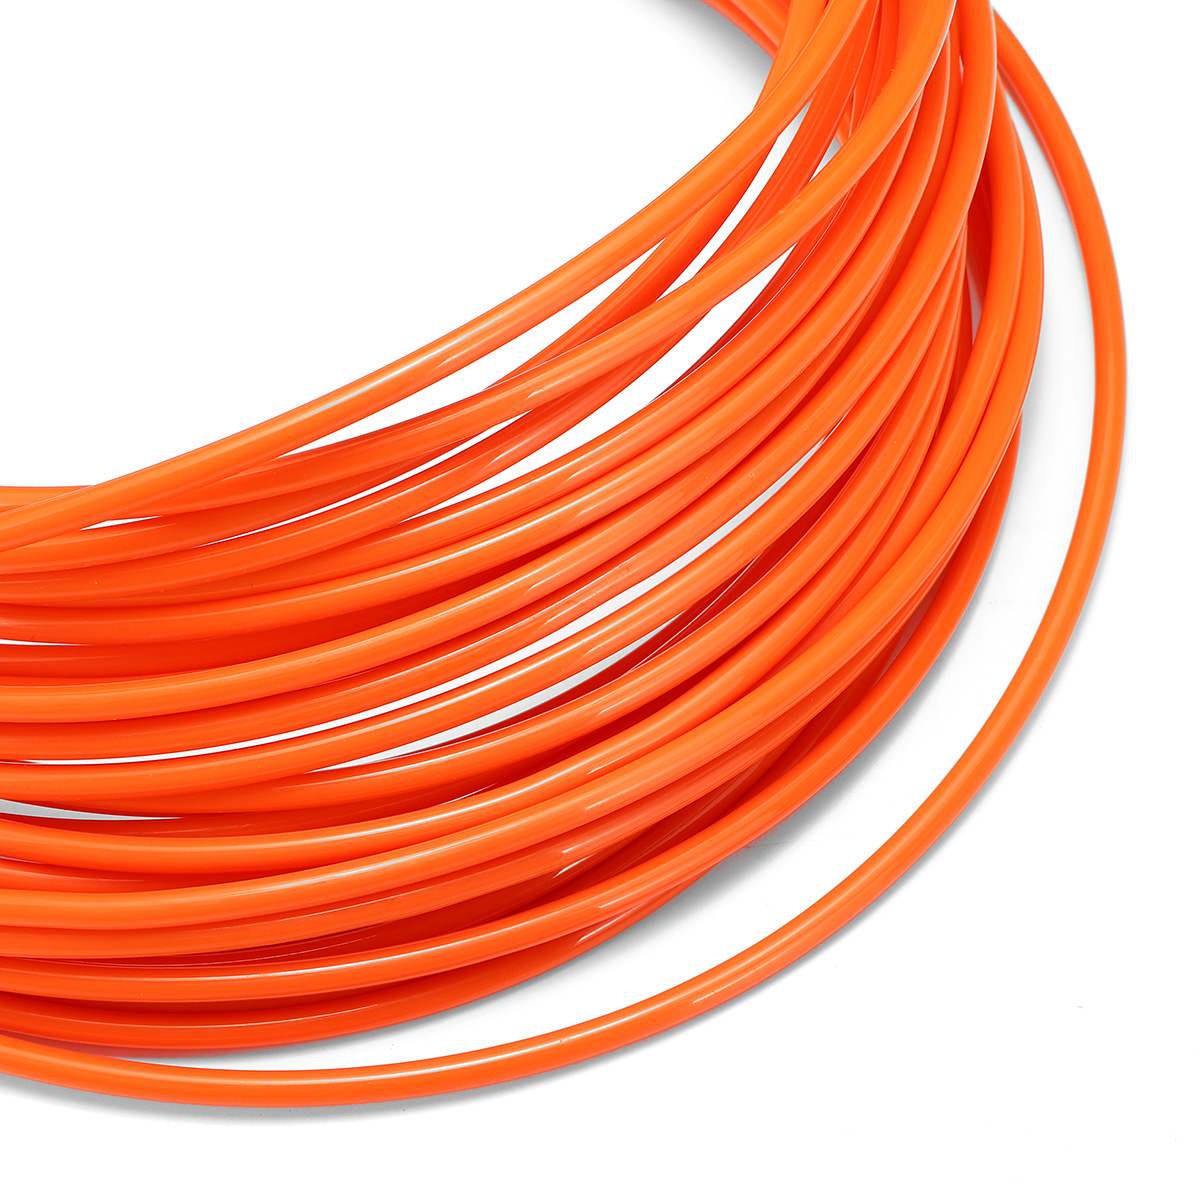 Find Cable Push Puller Reel Conduit Nylon Snake Fish Tape Wire Orange 4mm 15m for Sale on Gipsybee.com with cryptocurrencies